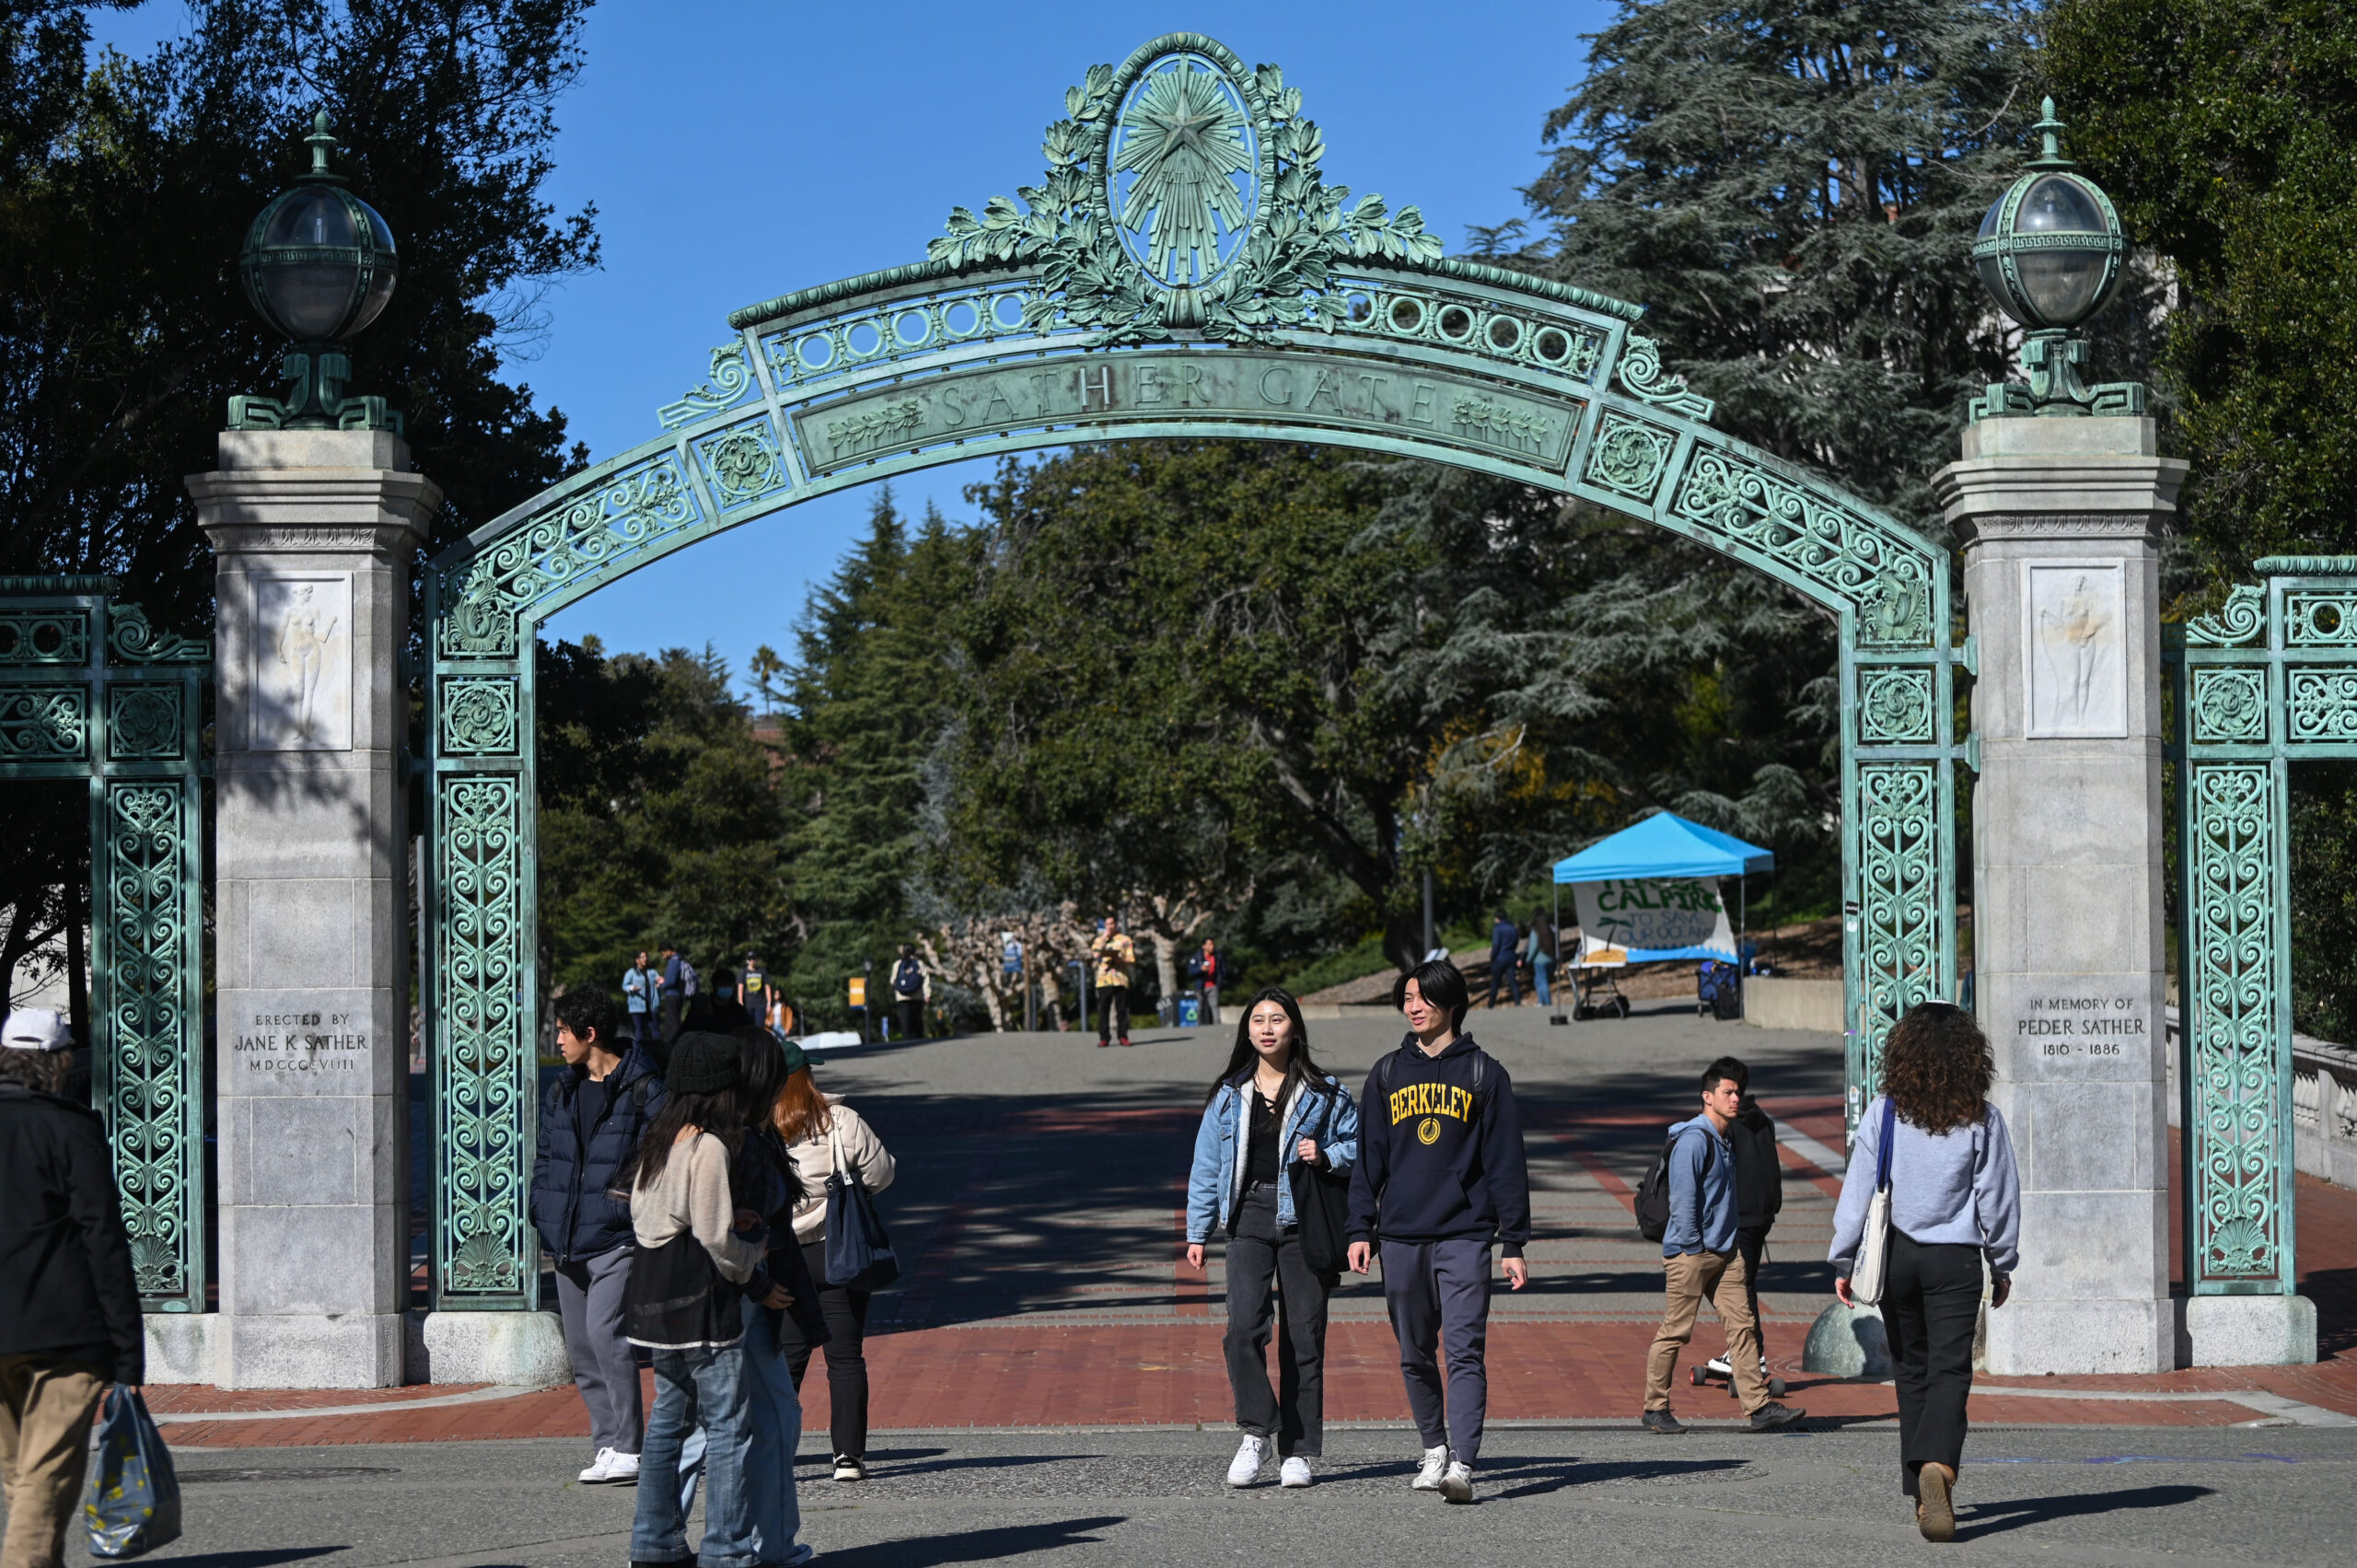 Students walk through Sather Gate at UC Berkeley on Feb. 15, 2023. | Samantha Laurey for The Standard